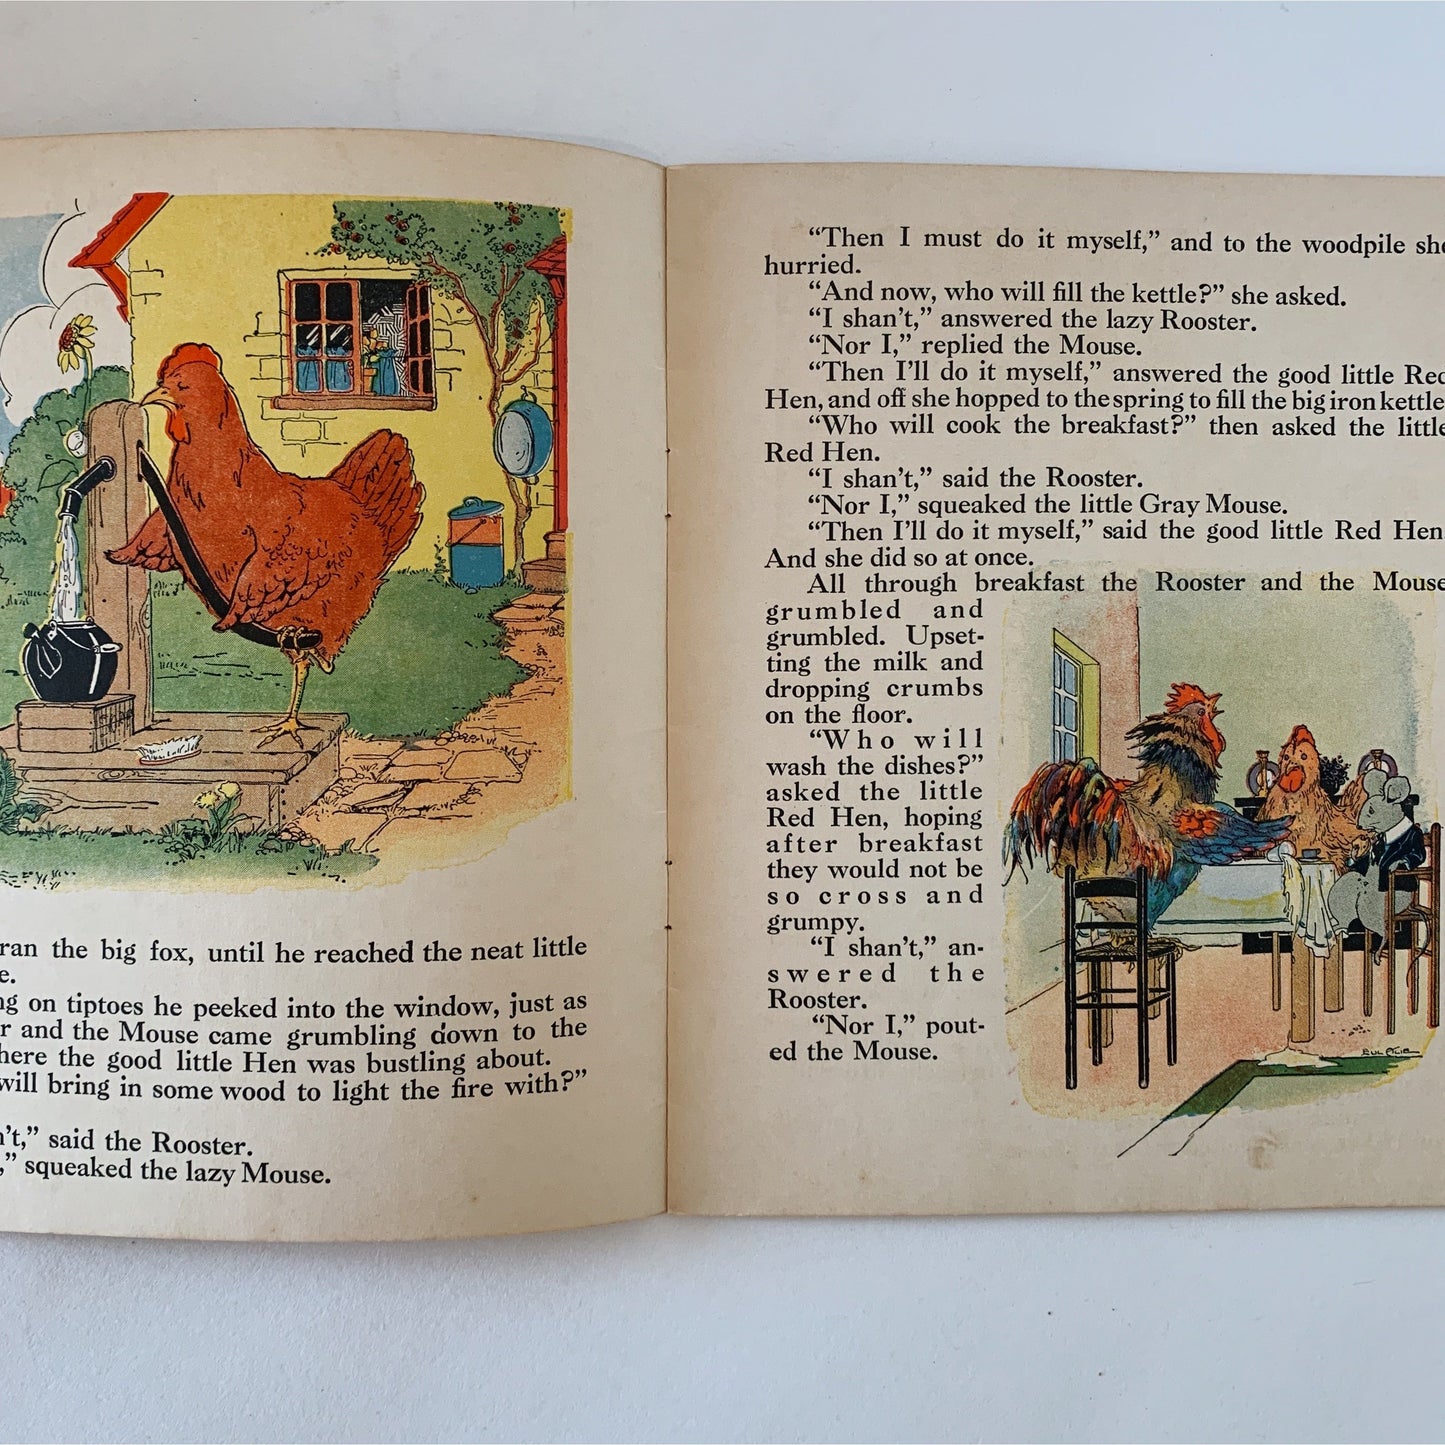 The Rooster, The Mouse, and the Little Red Hen, Platt & Munk Paperback, 1932